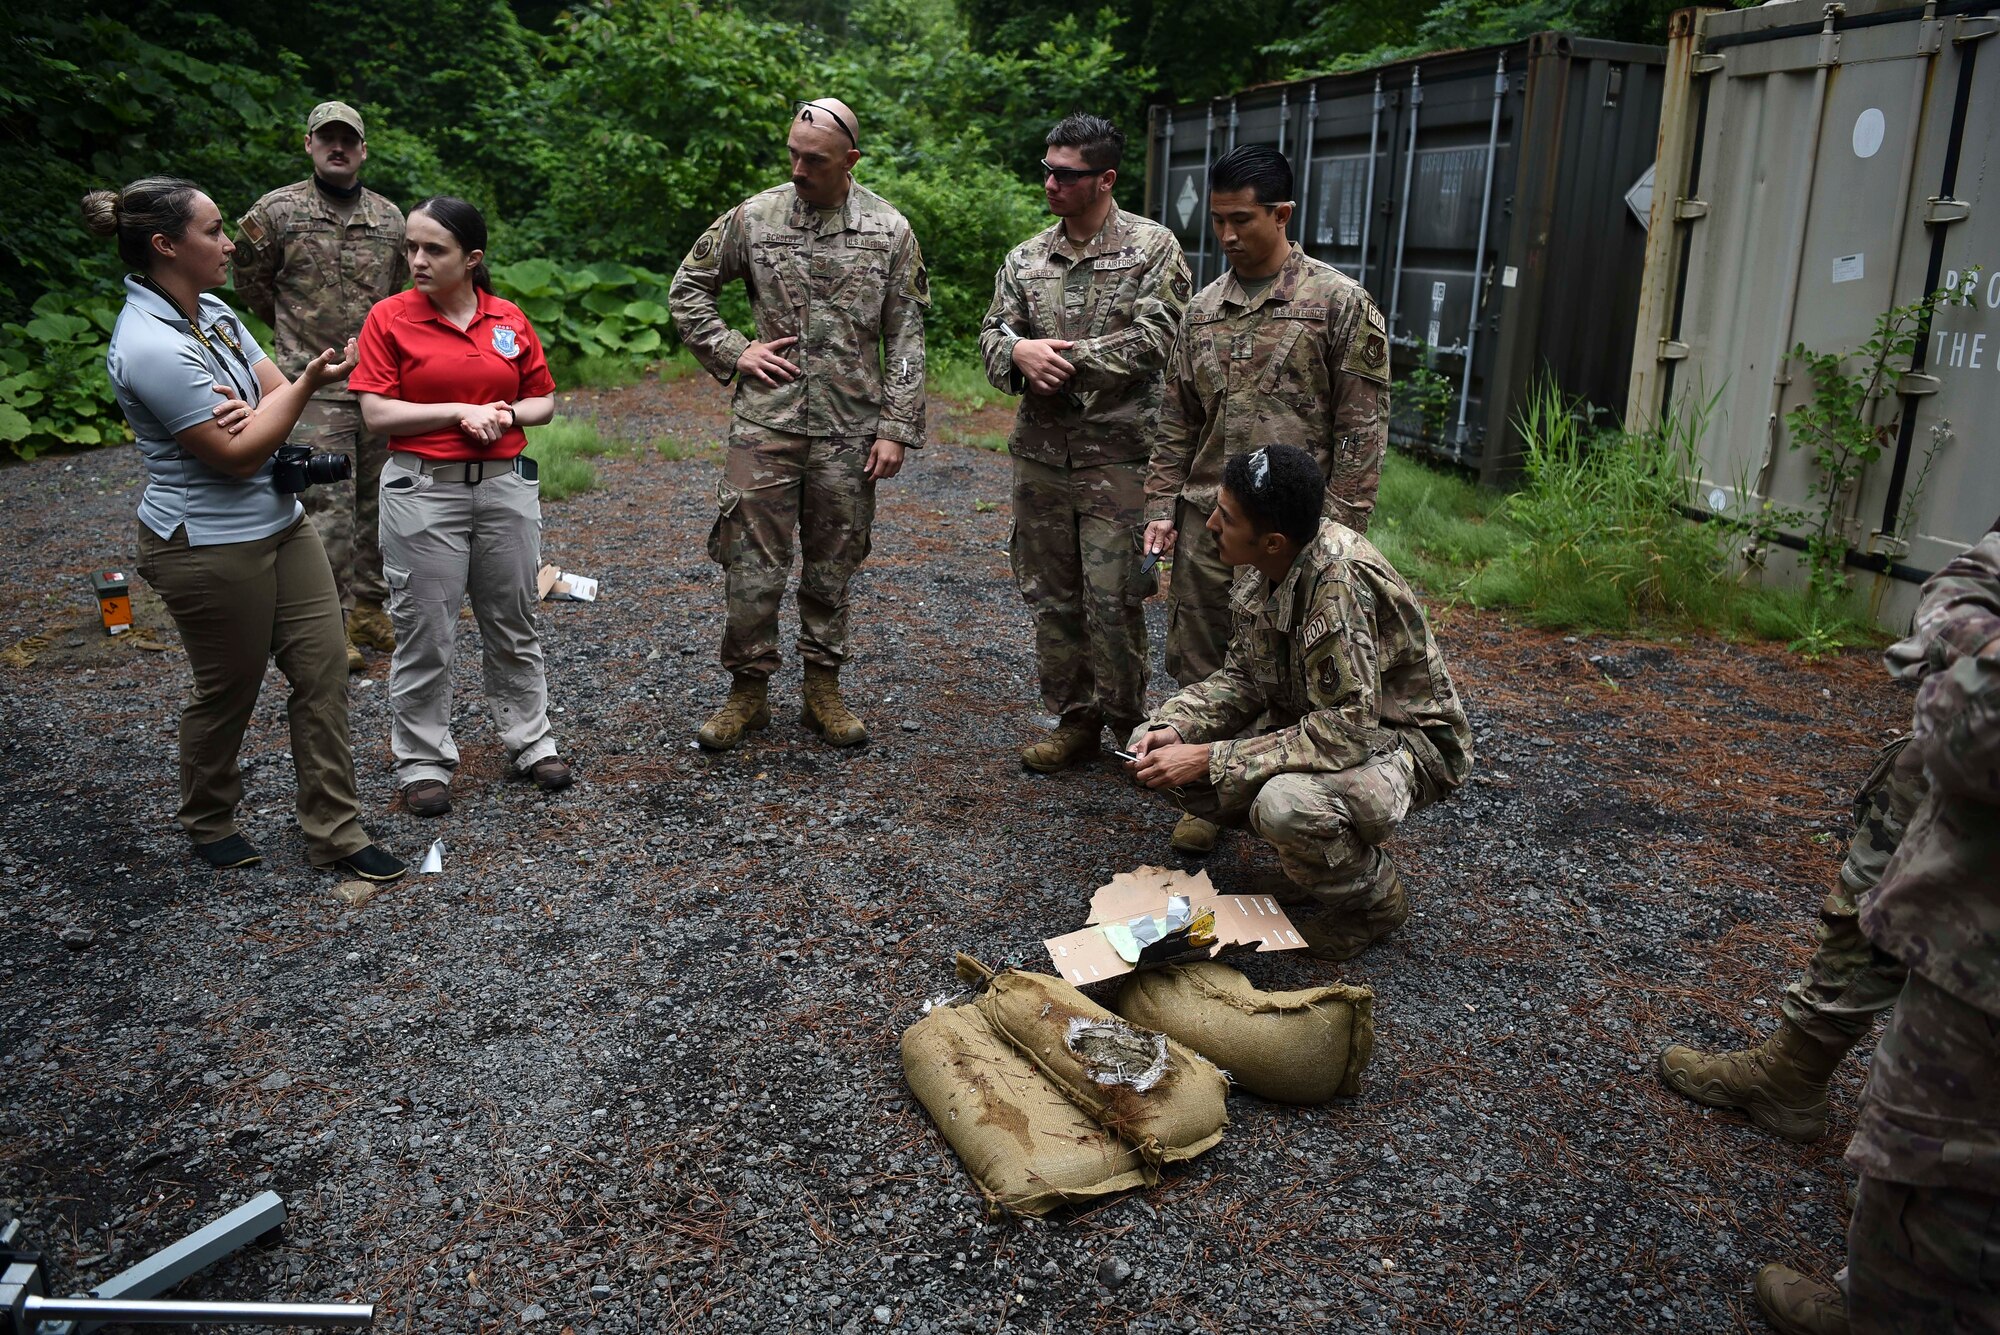 Military members stand around a prop bomb made of cardboard that's bee shot with an anti-bomb device.